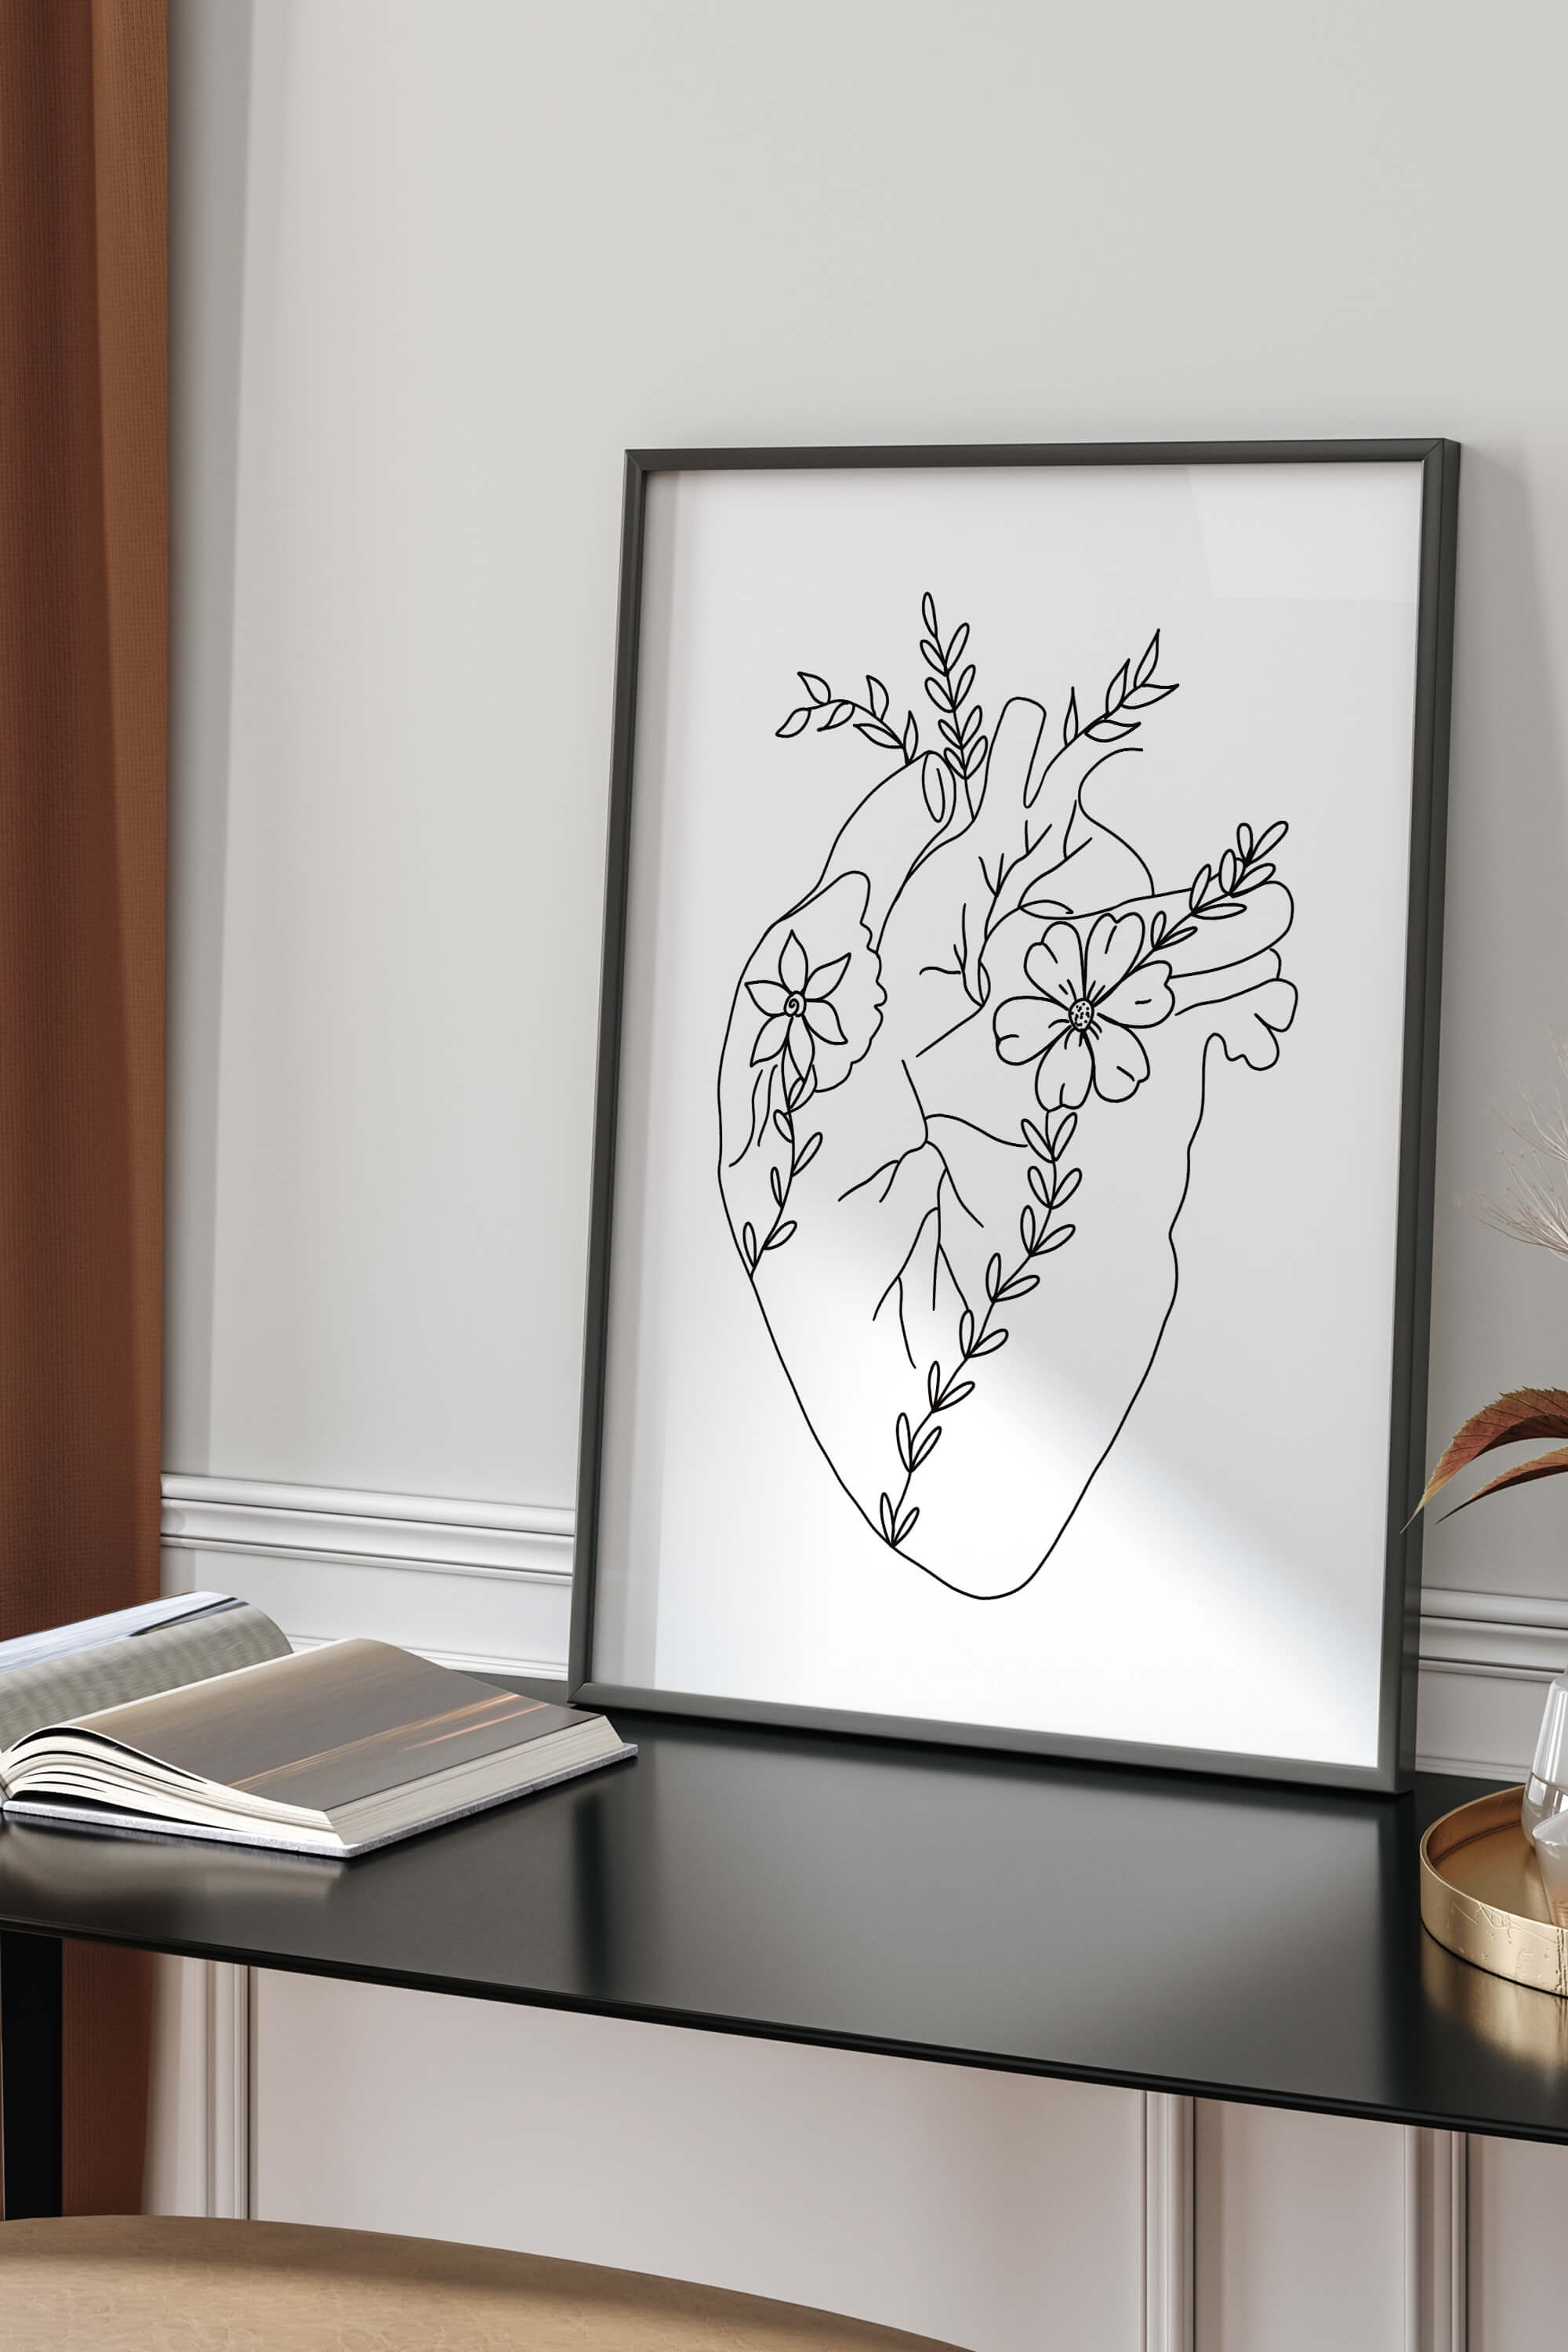 Monochrome elegance heart art - A sophisticated and timeless depiction of love, where simplicity and intricacy merge in a captivating print.